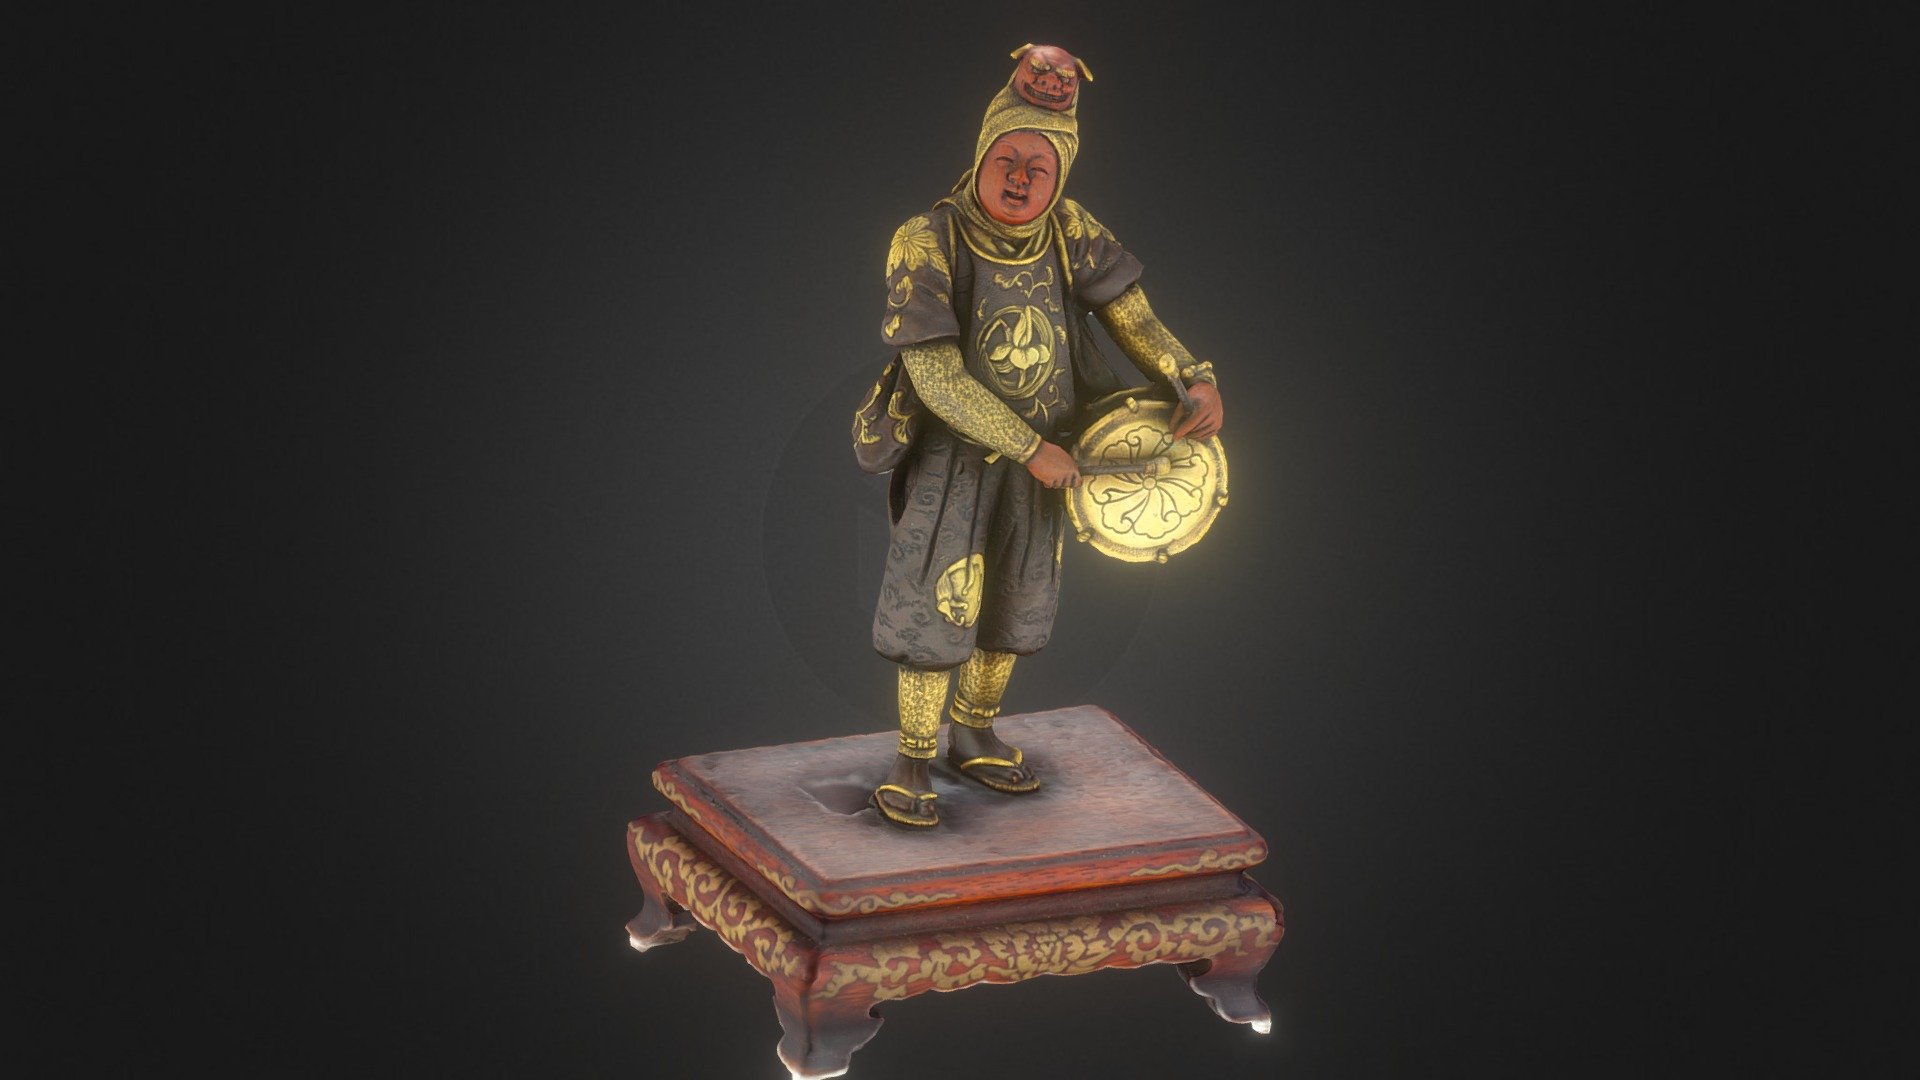 Very Hi-Resolution scan of a man wearing a decorated uniform, standing holding a taiko drum  looking into the distance. Mounted on a rectangular lacquered &amp; gilt wood stand. Height 8 inches.

Meiji Period (1868-1912), signed Miayo.

Created in RealityCapture by Capturing Reality from 1527 images in 03h:17m:40s 3d model